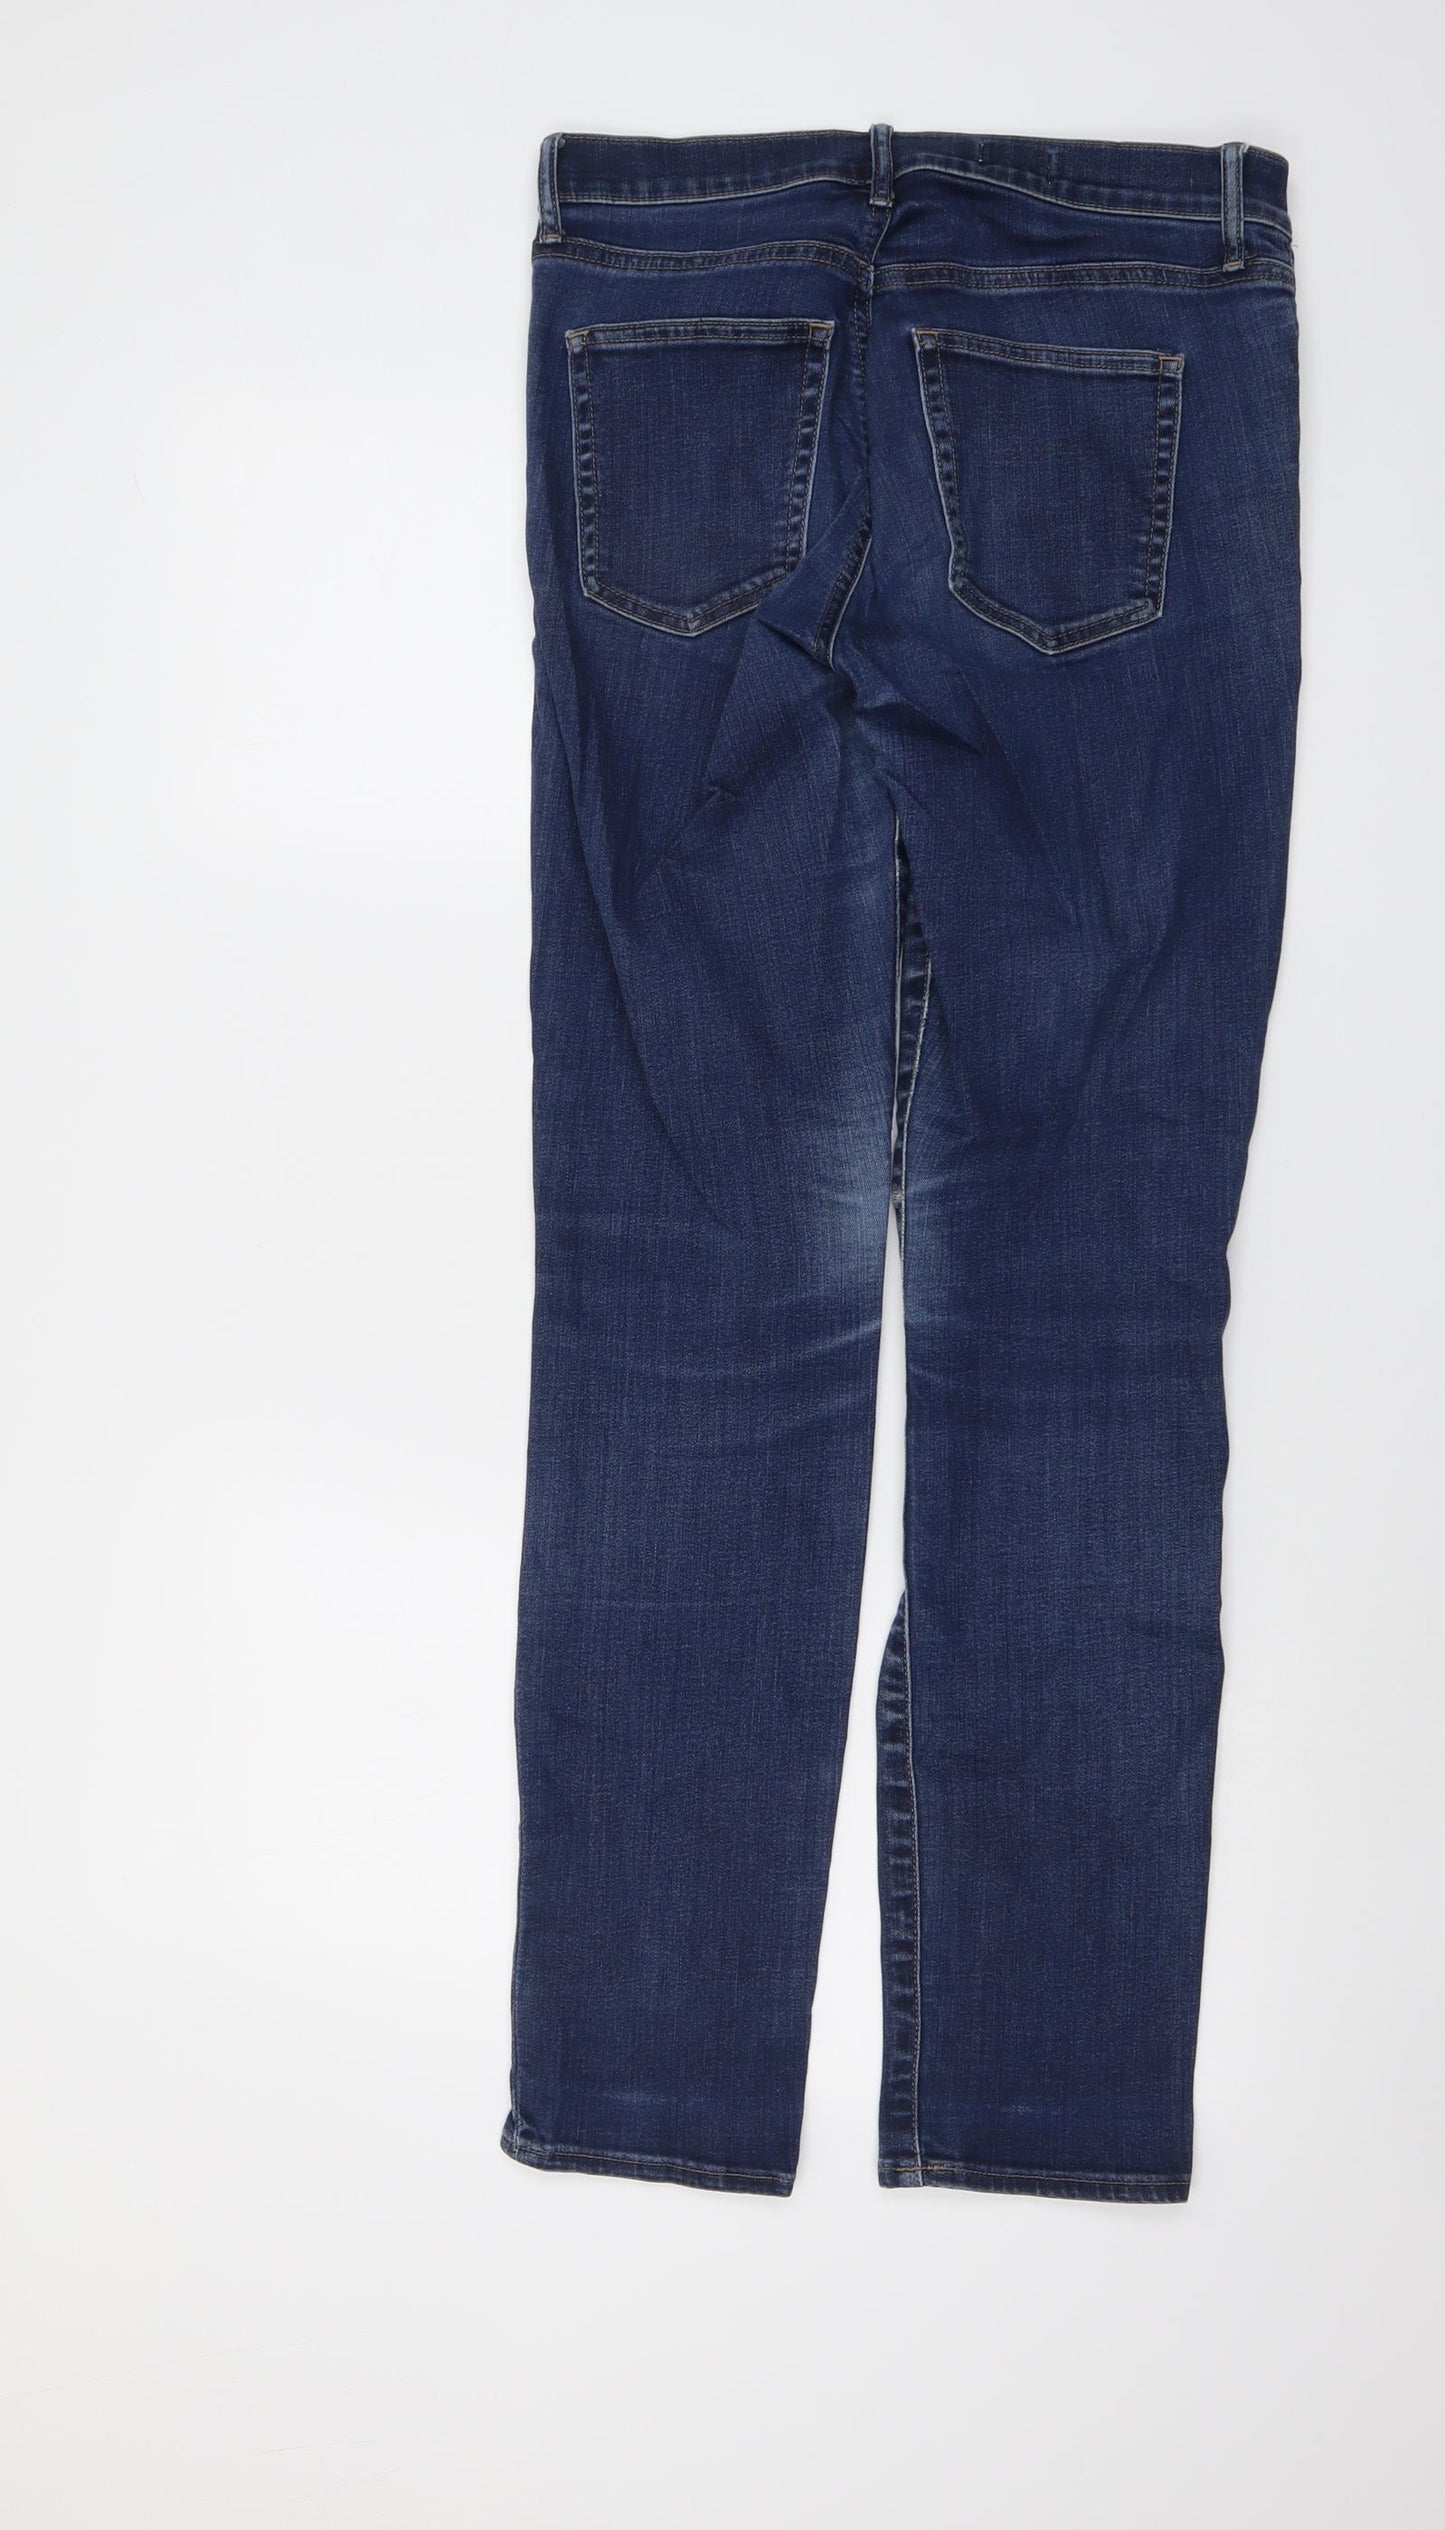 Gap Womens Blue Cotton Skinny Jeans Size 30 in L31 in Regular Button